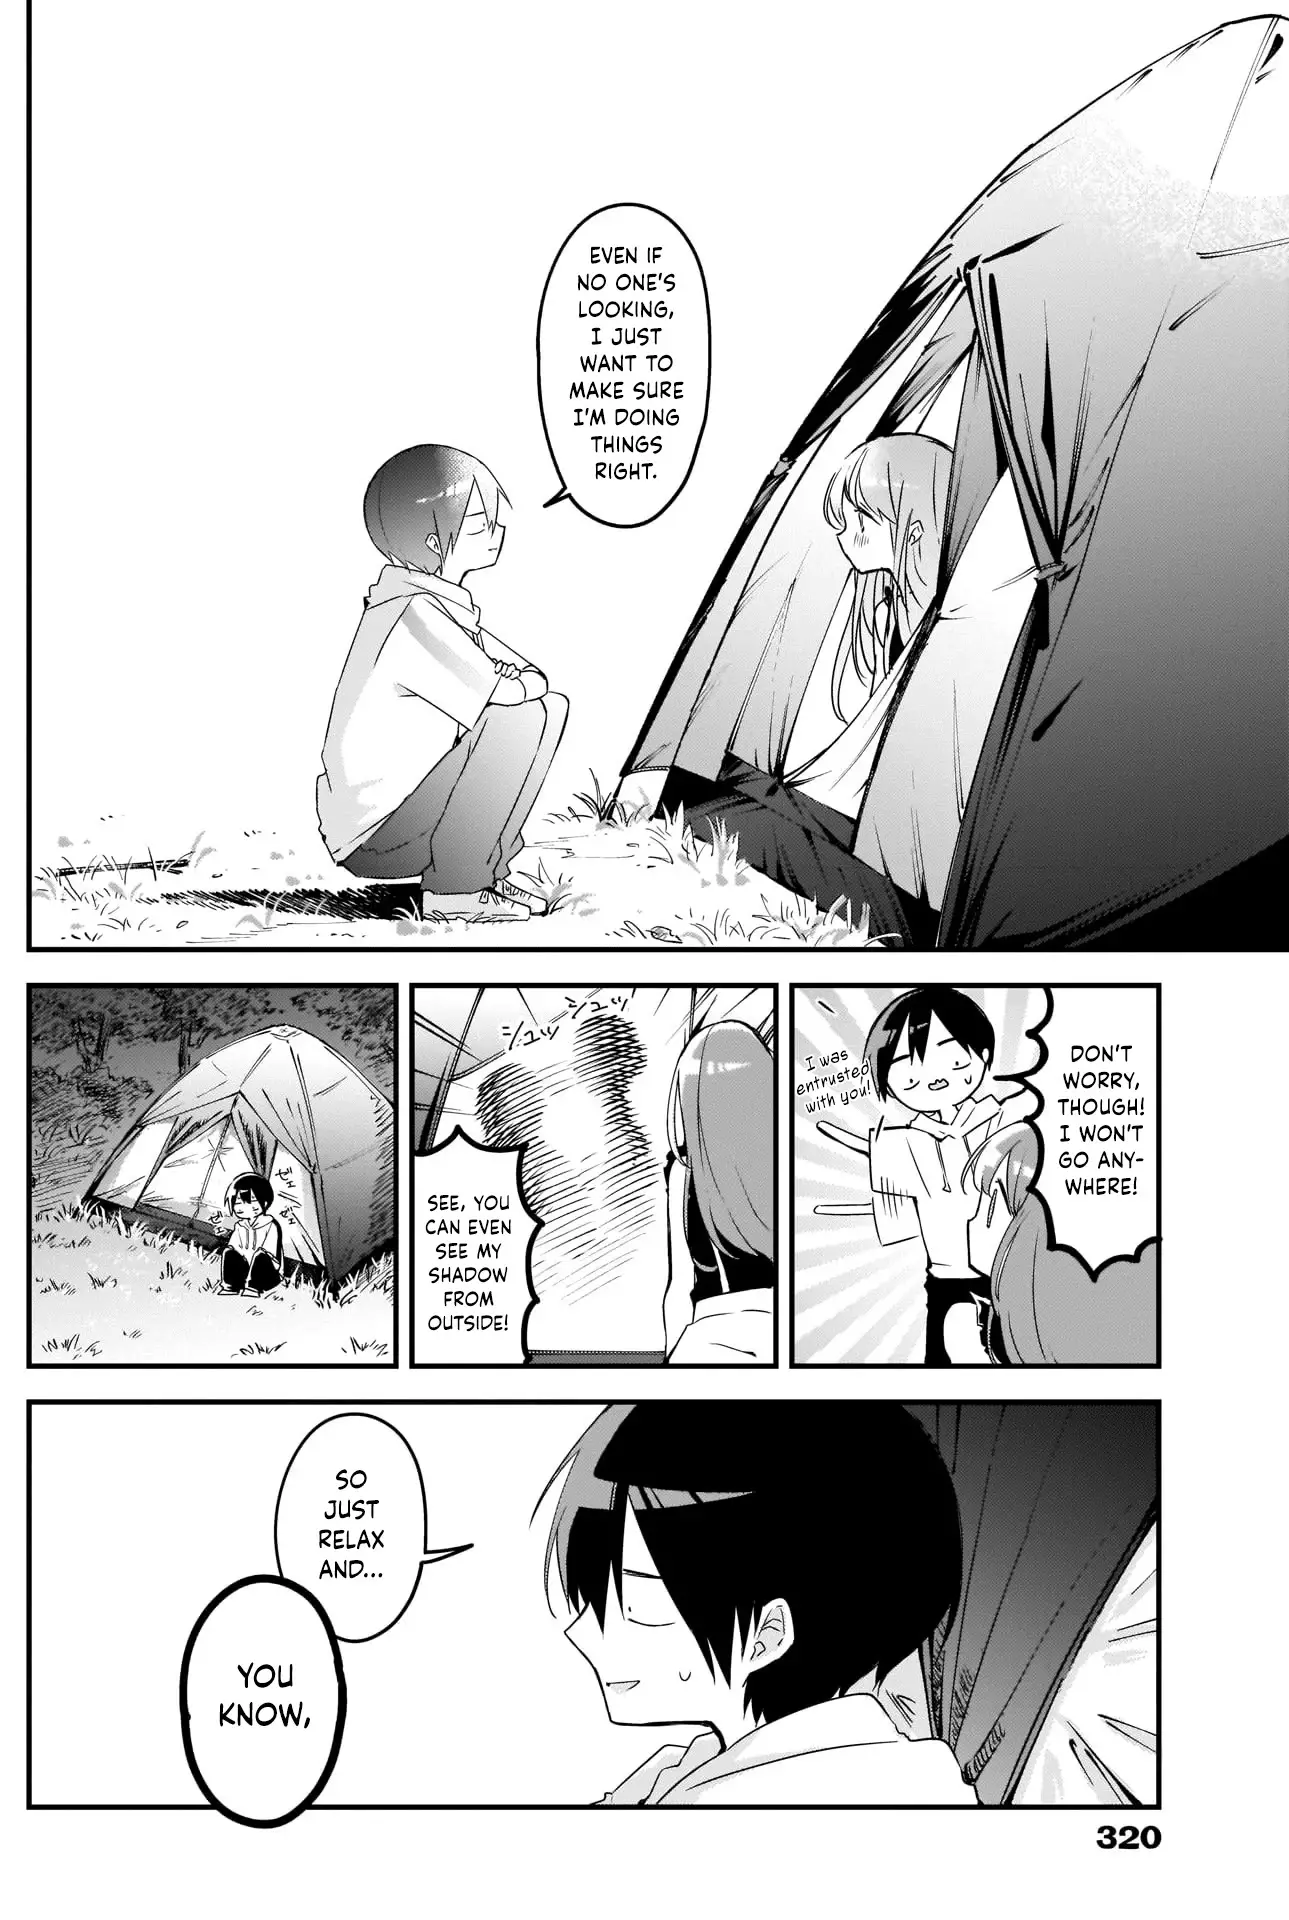 Kubo-San Doesn't Leave Me Be (A Mob) - 71 page 8